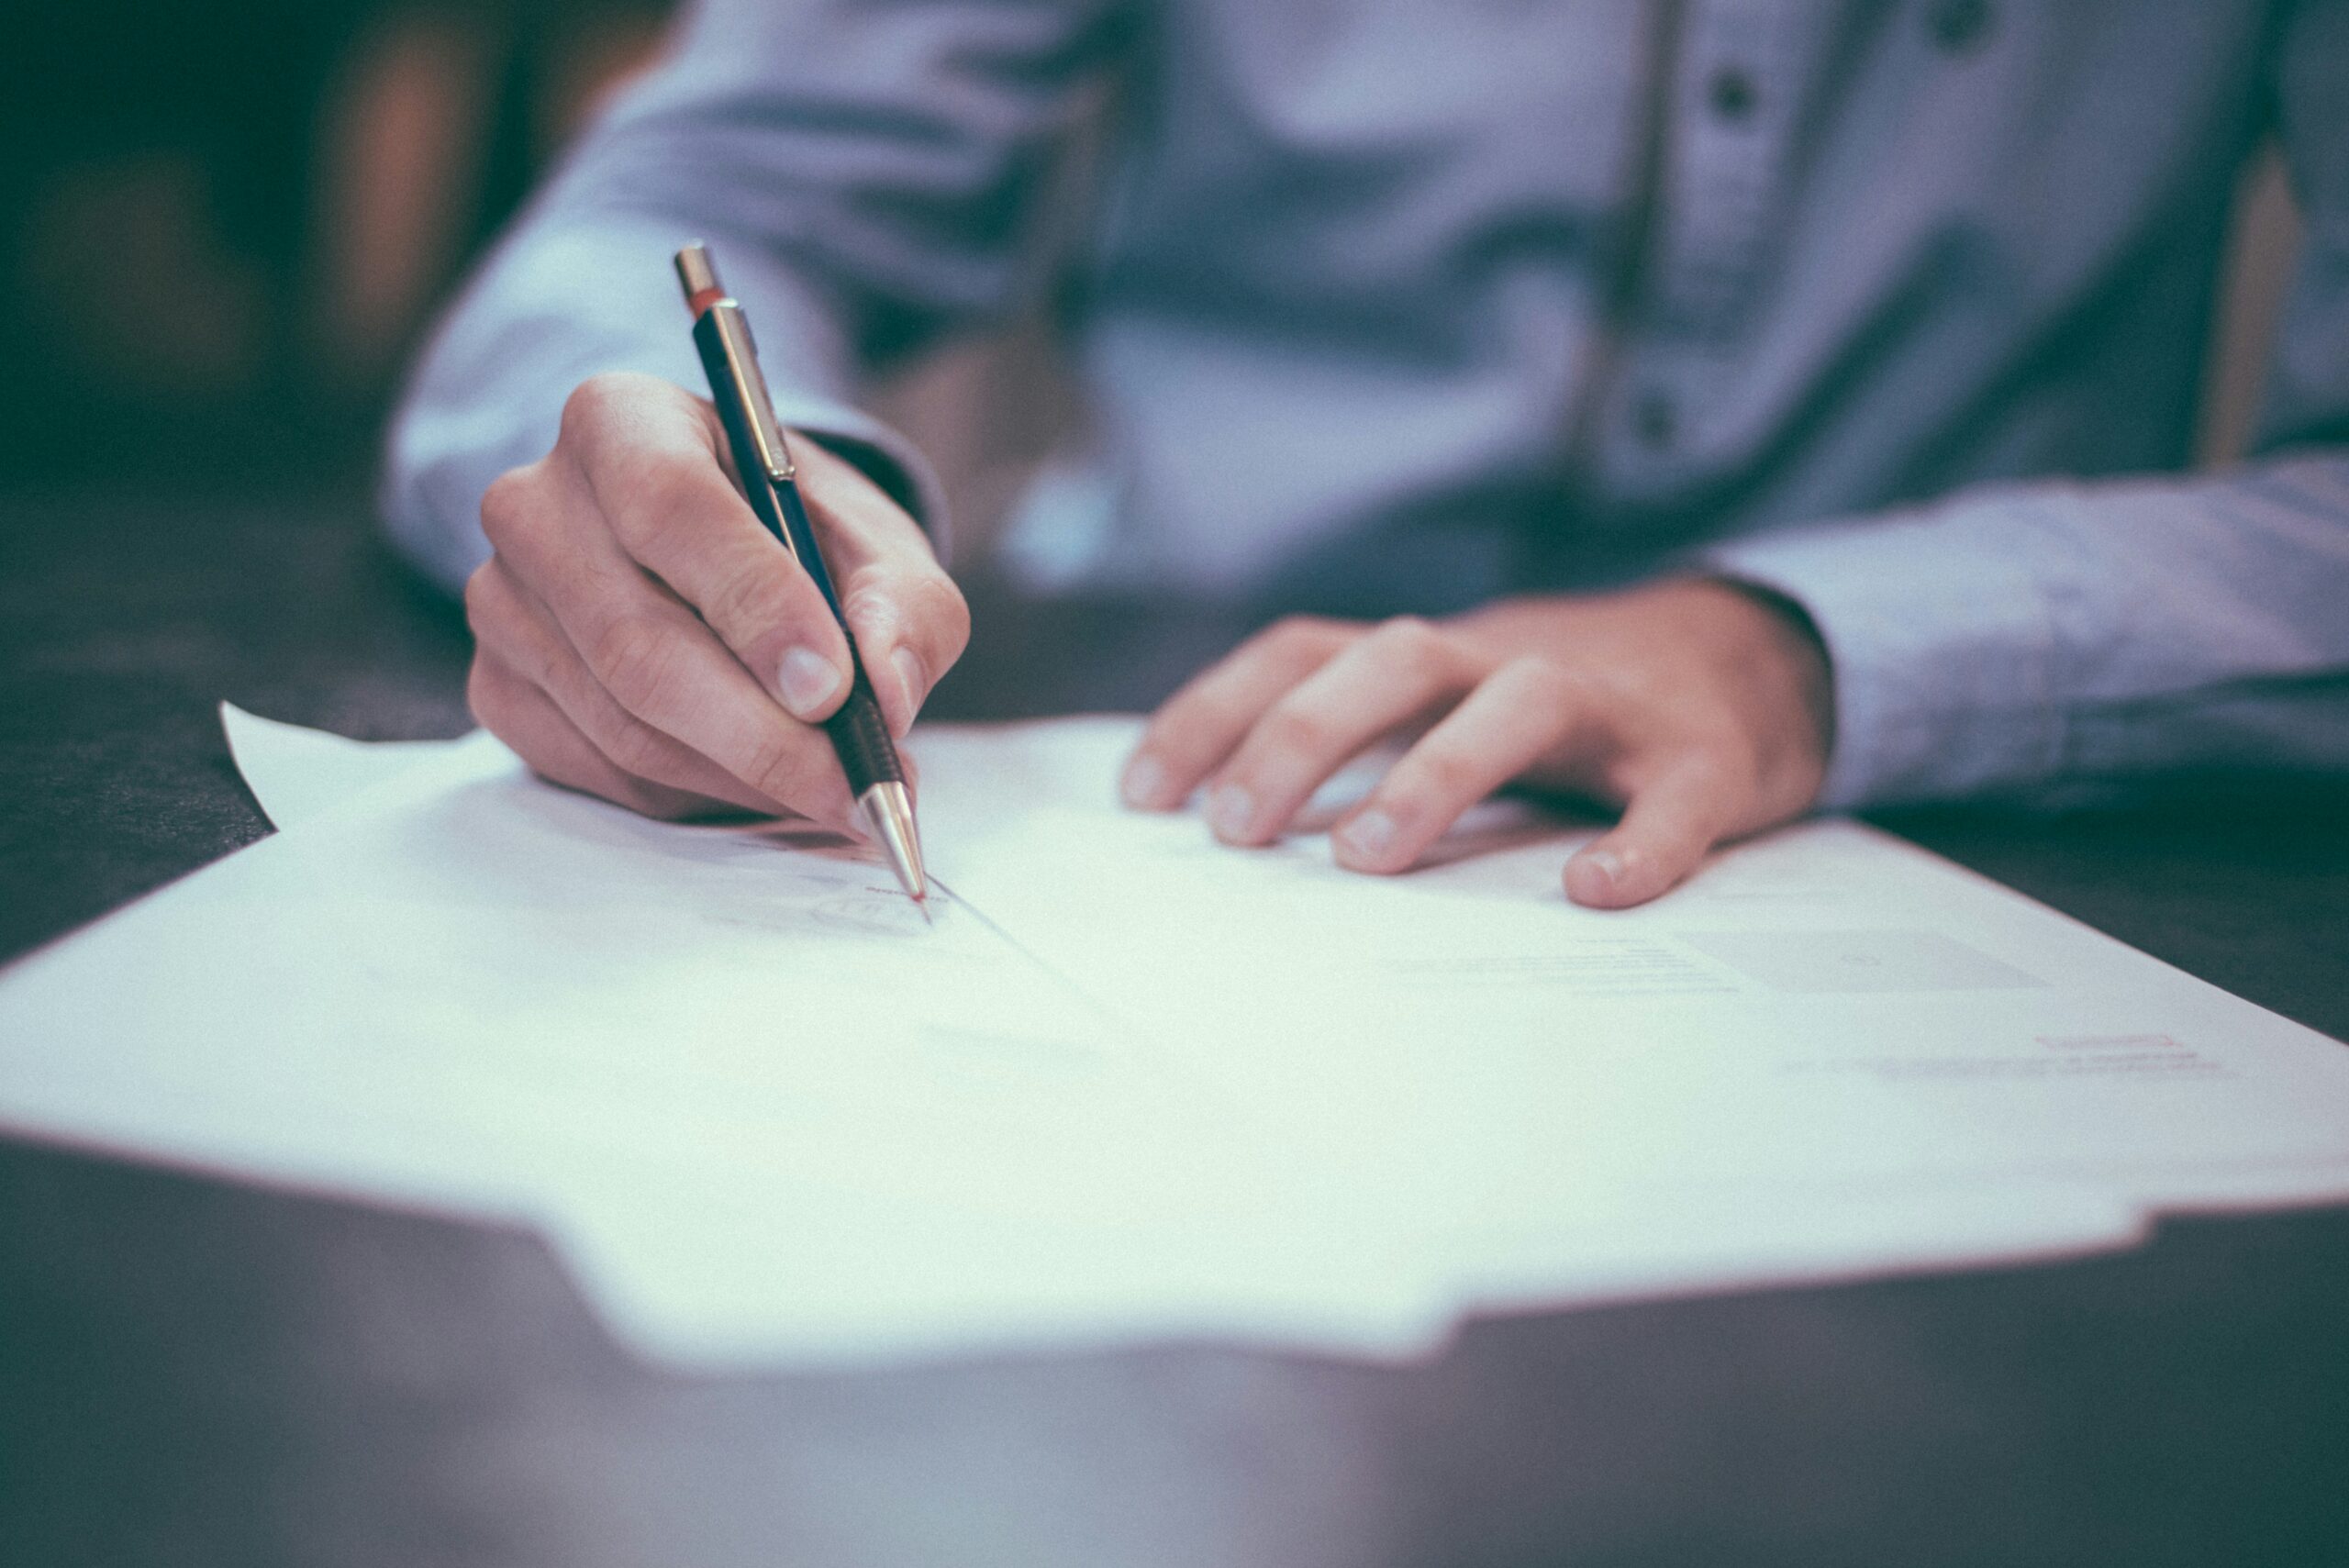 A close-up photo of a person signing documents. The individual is wearing a light blue shirt and is holding a pen, poised to write on one of several papers spread out on a dark wooden table. The focus is on the hands and the documents, emphasizing the act of signing or reviewing important paperwork. The background is blurred, keeping attention on the task at hand, suggesting a professional or business setting.